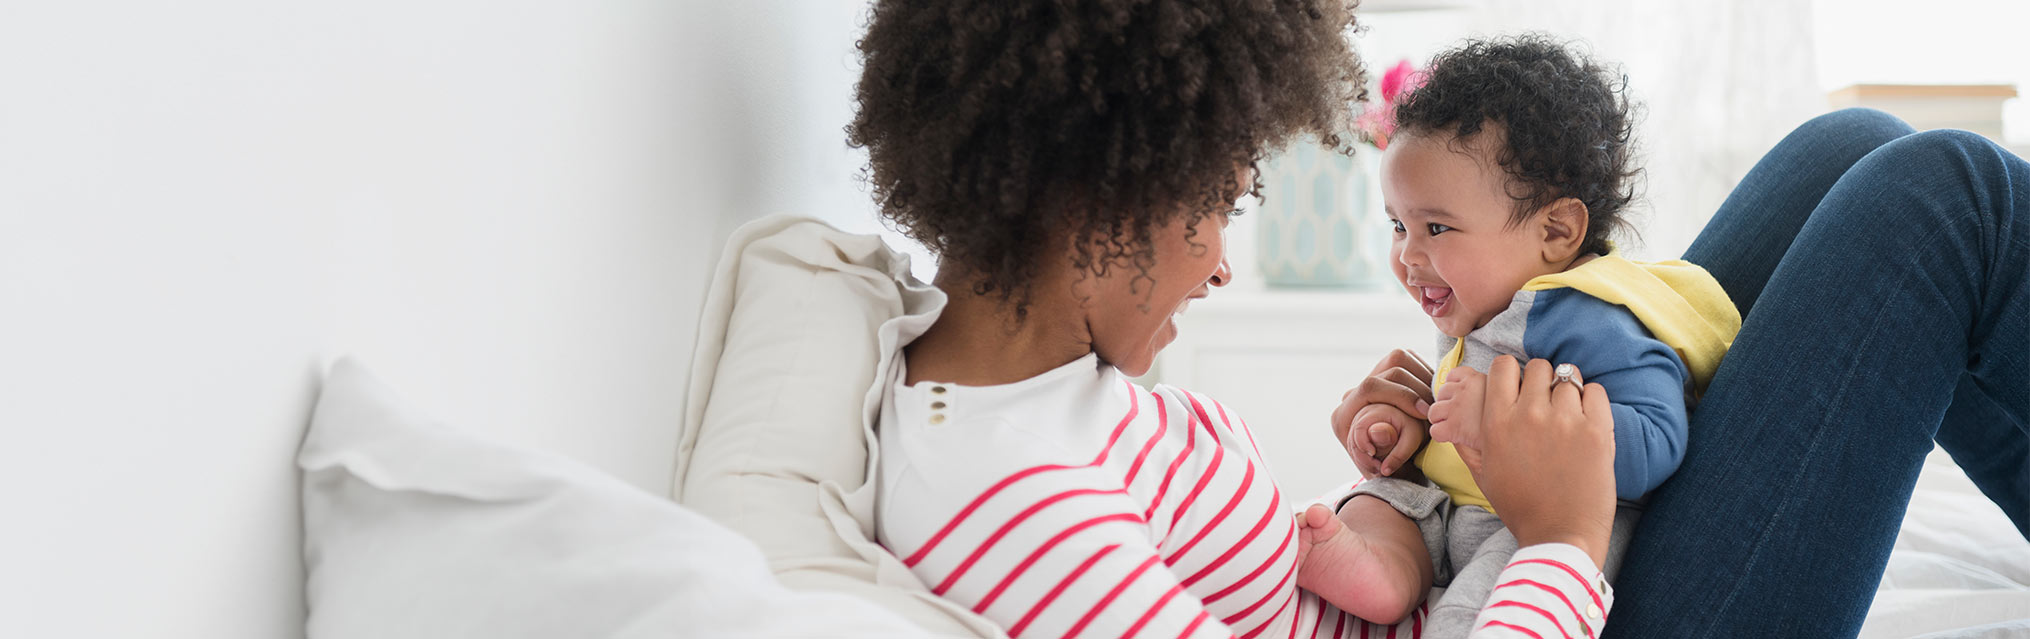 Make a difference for moms and babies with an electricity plan that supports March of Dimes
